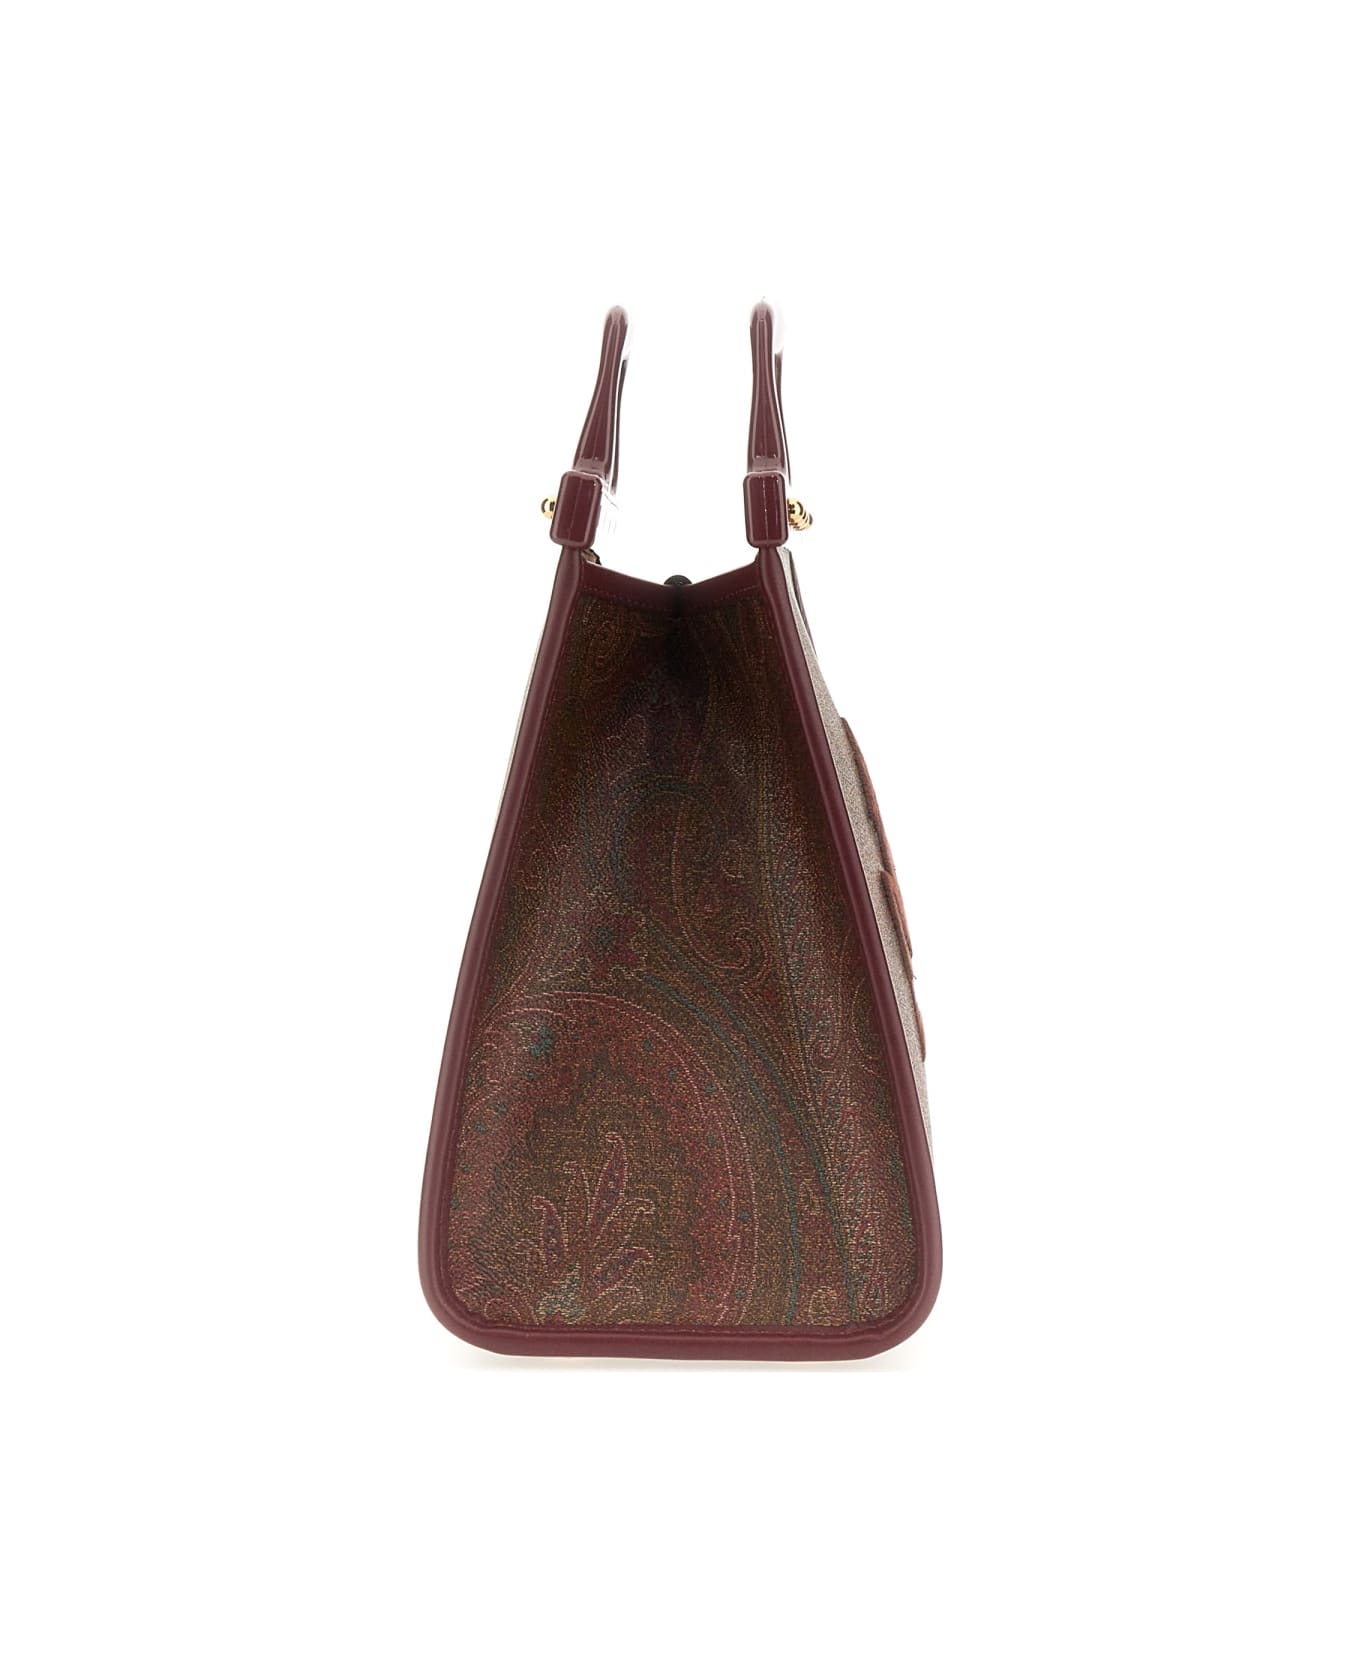 Etro Love Trotter Bag Small - BORDEAUX トートバッグ